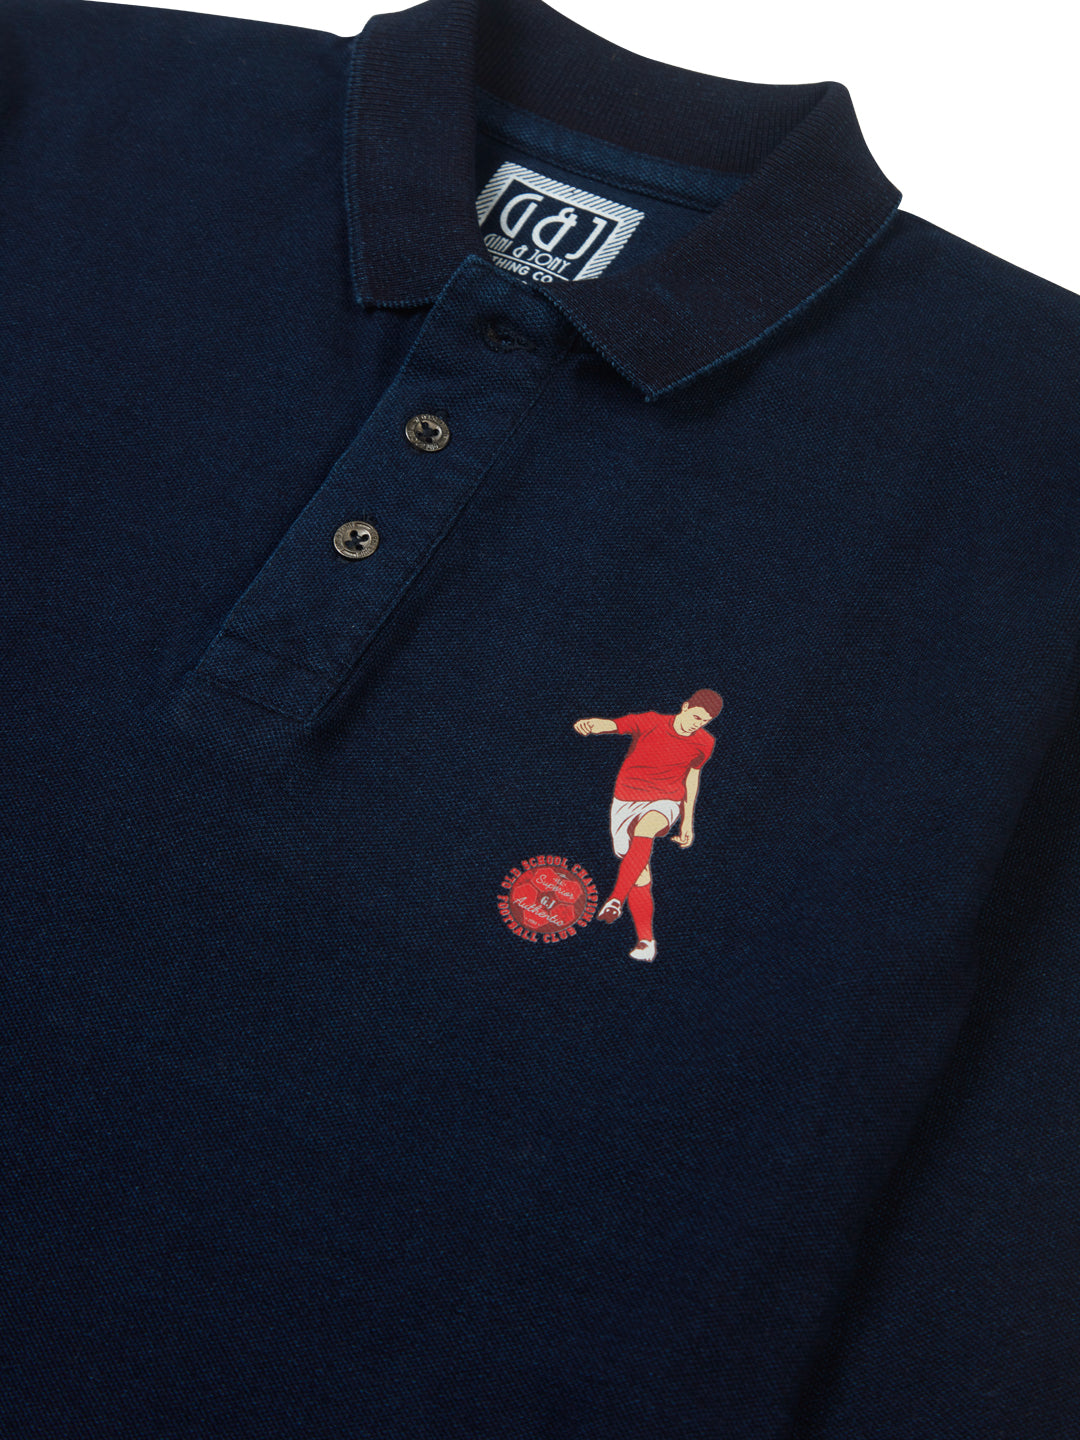 Boys Navy Blue Solid knitted polo t-shirt